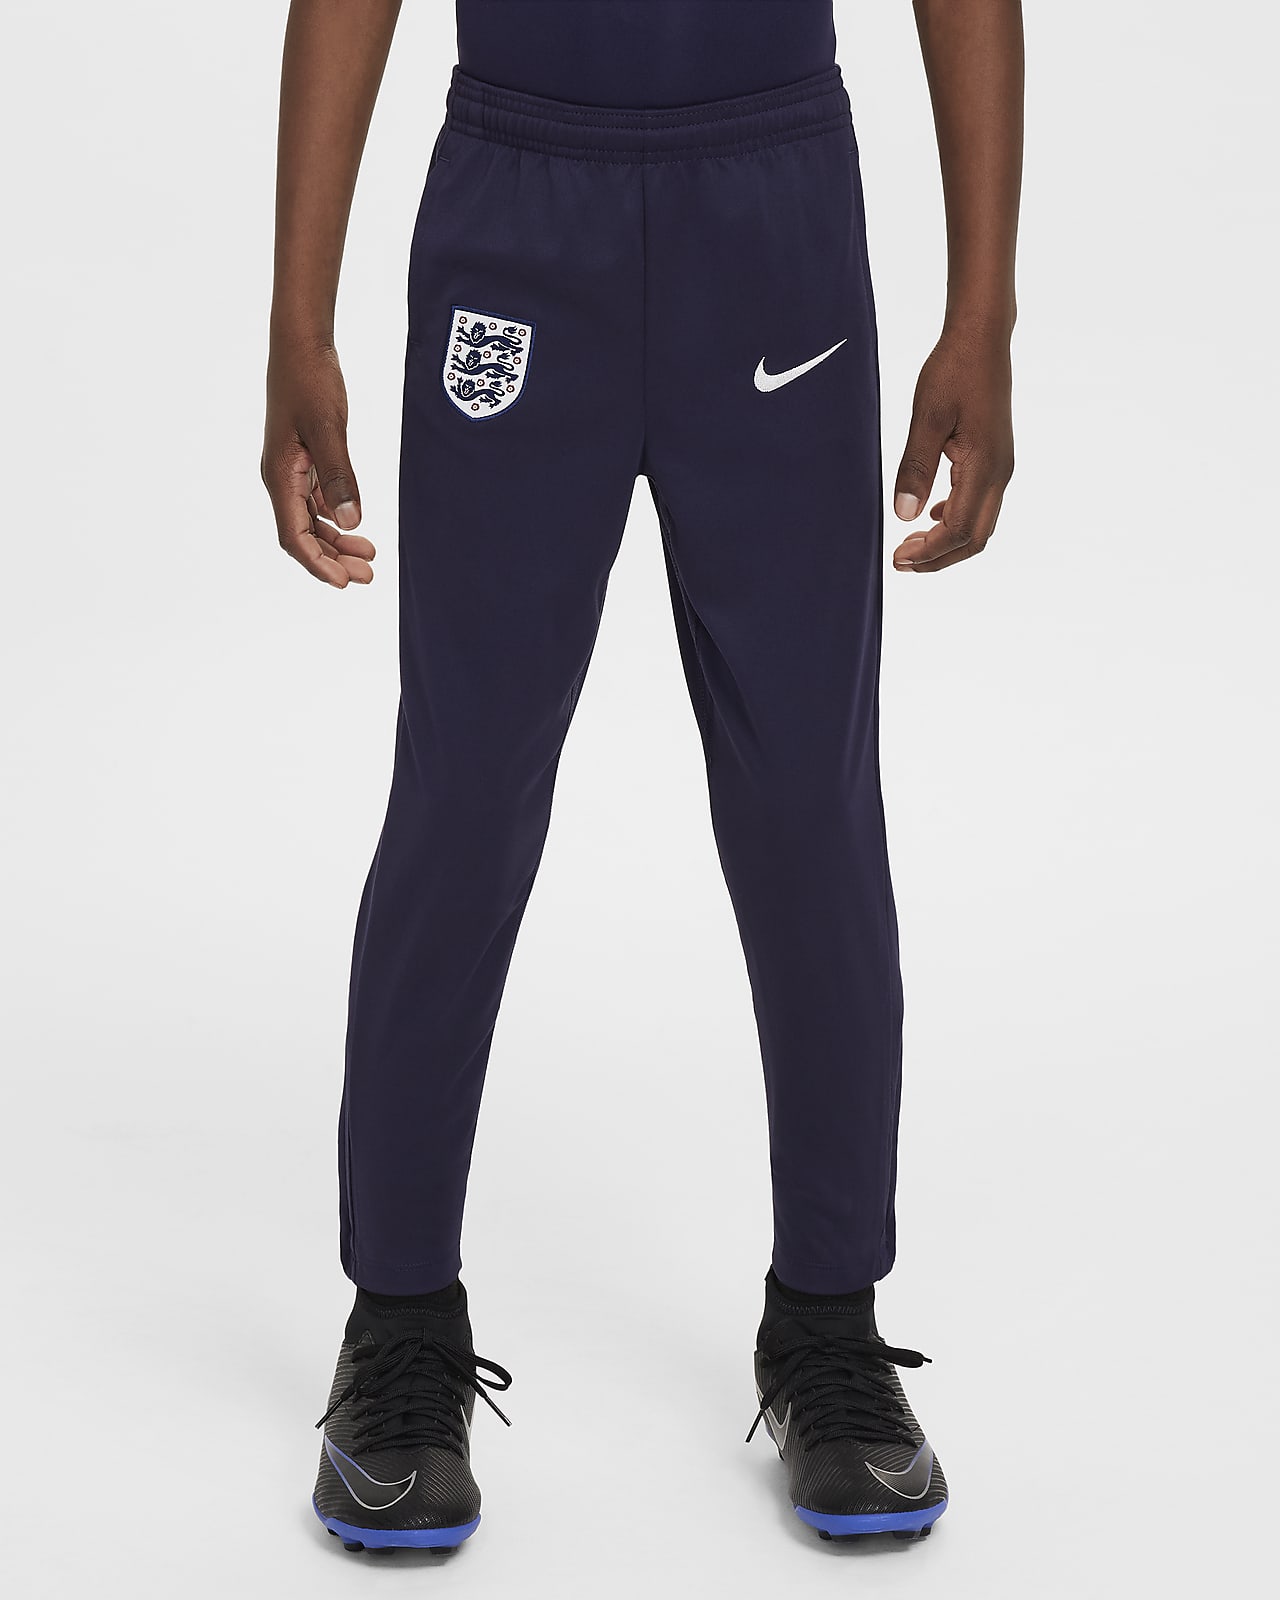 England Academy Pro Younger Kids' Nike Dri-FIT Football Knit Pants